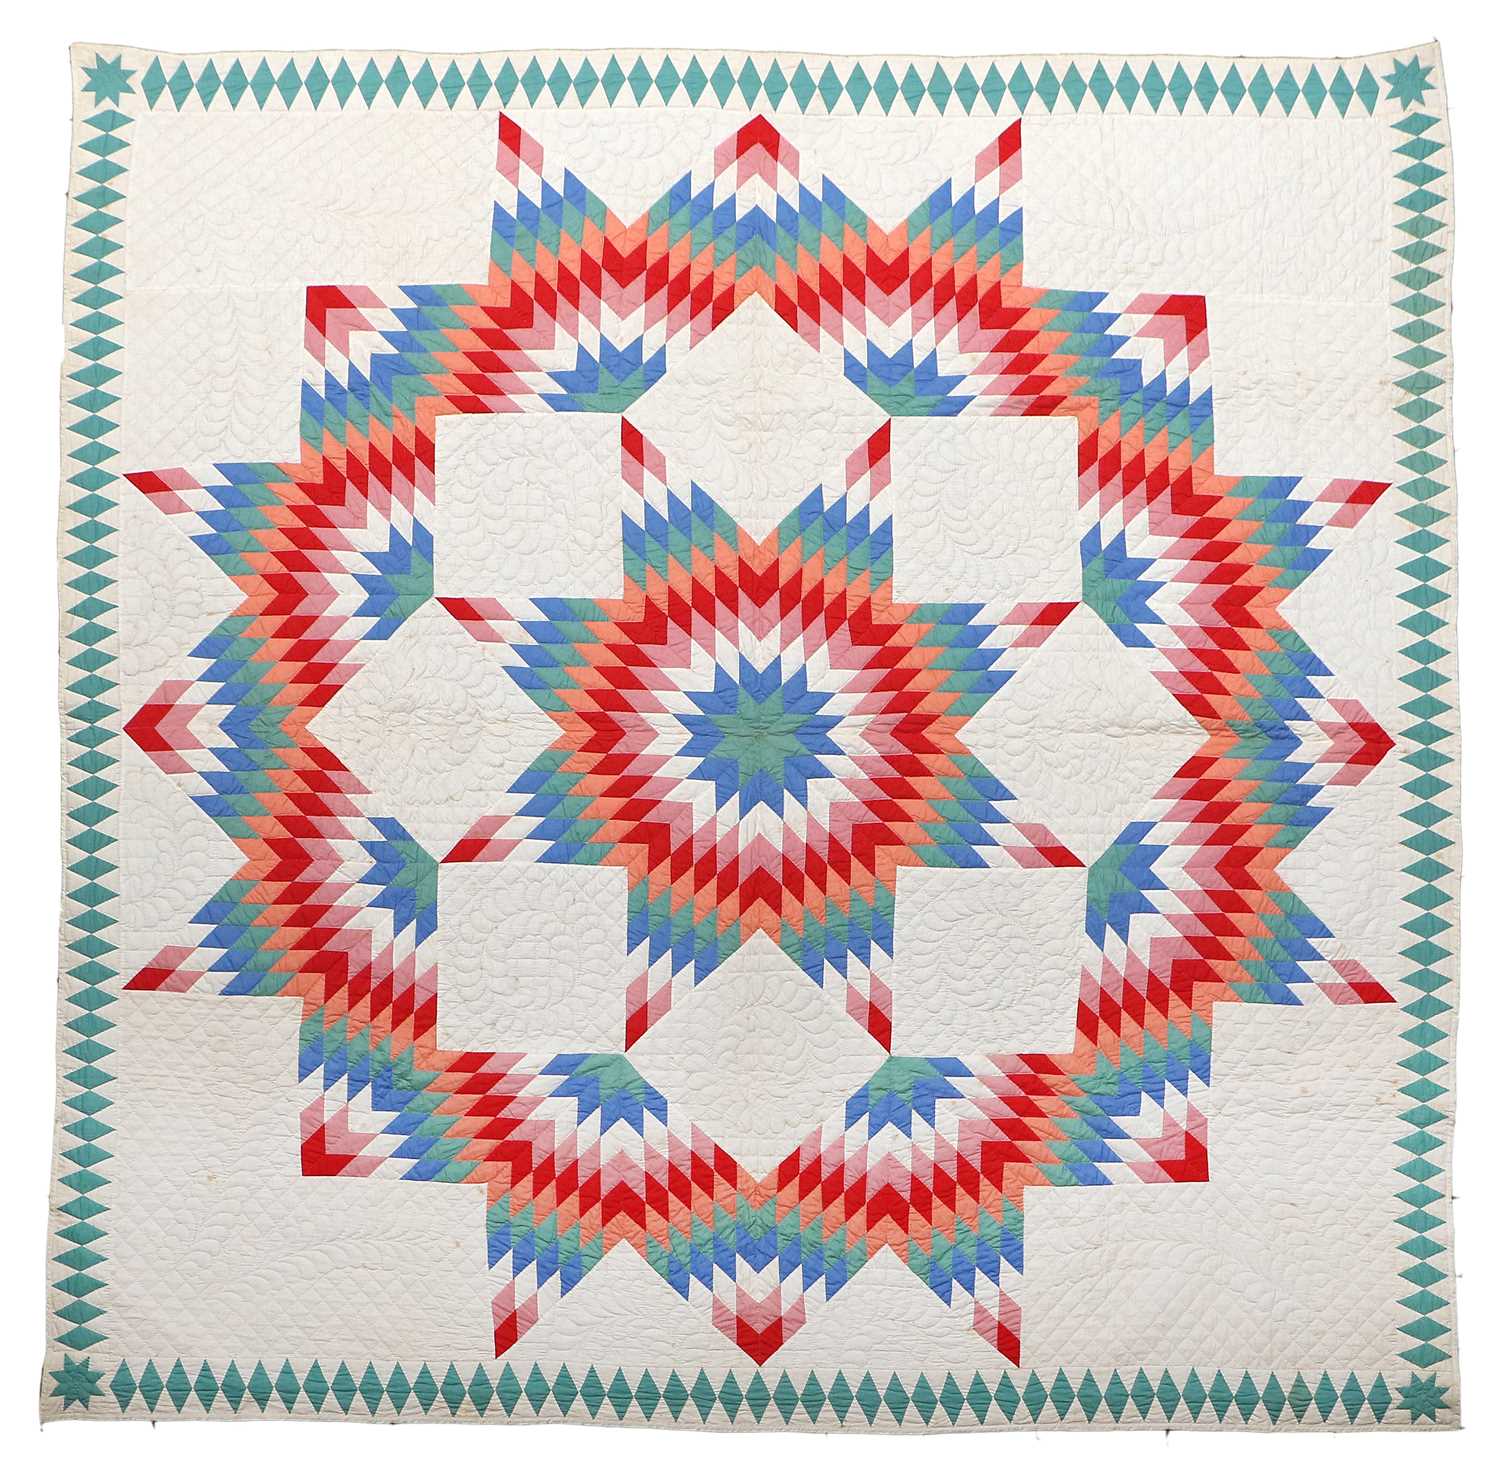 Circa 1890 Star of Bethlehem or Lone Star North Country Quilt, comprising multi coloured diamond